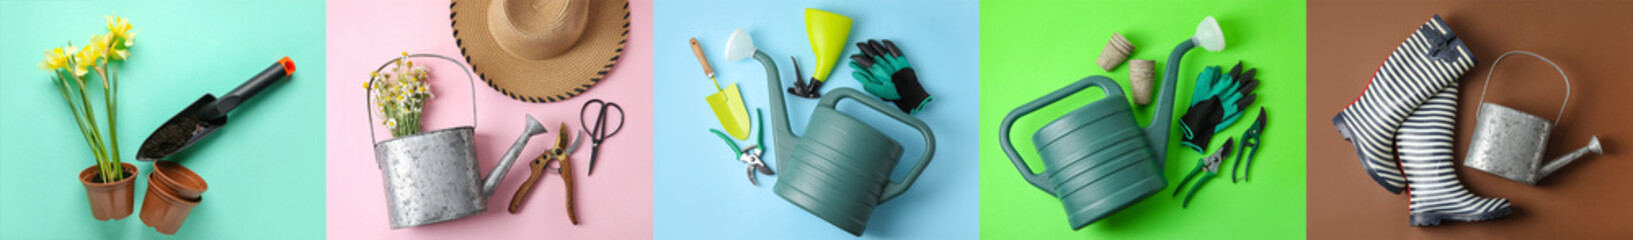 Set of different gardening supplies on colorful background, top view